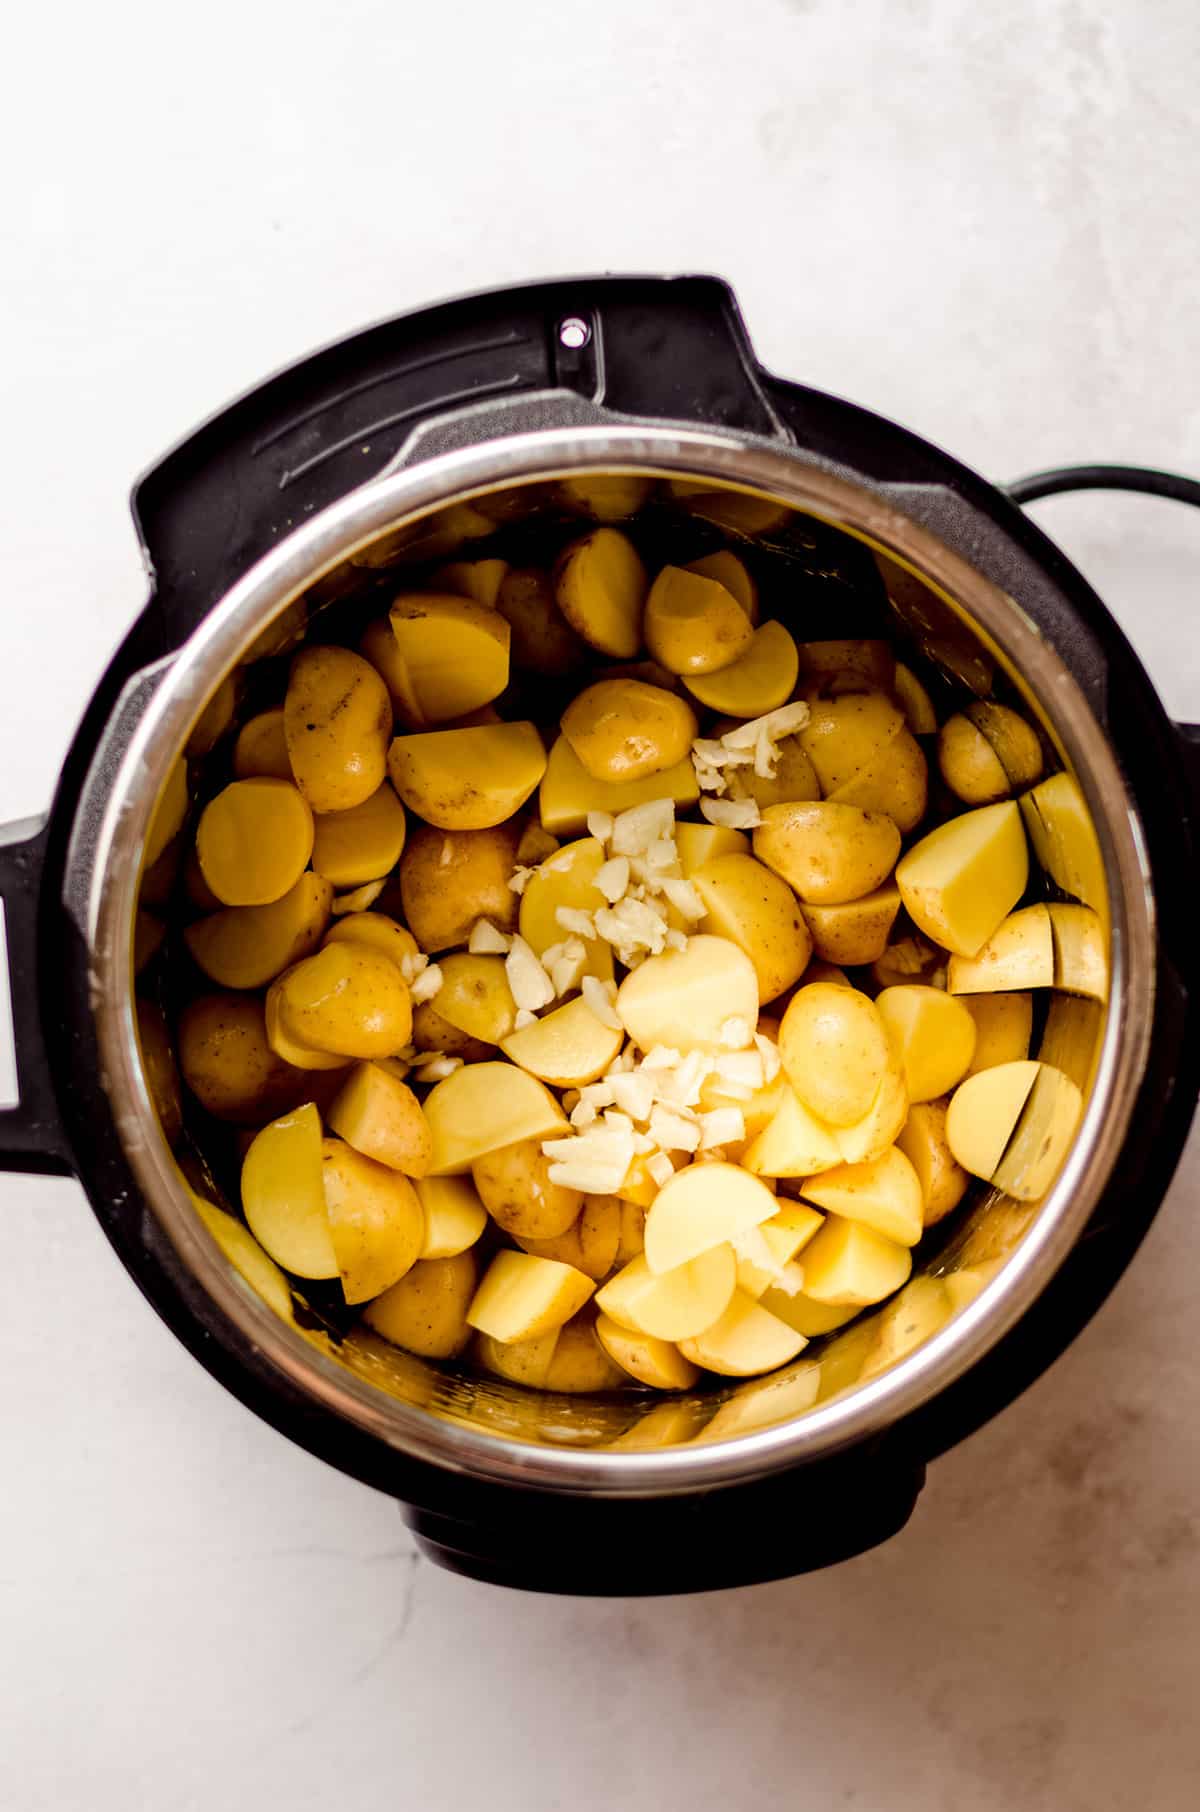 potatoes and garlic in an instant pot ready to make garlic mashed potatoes